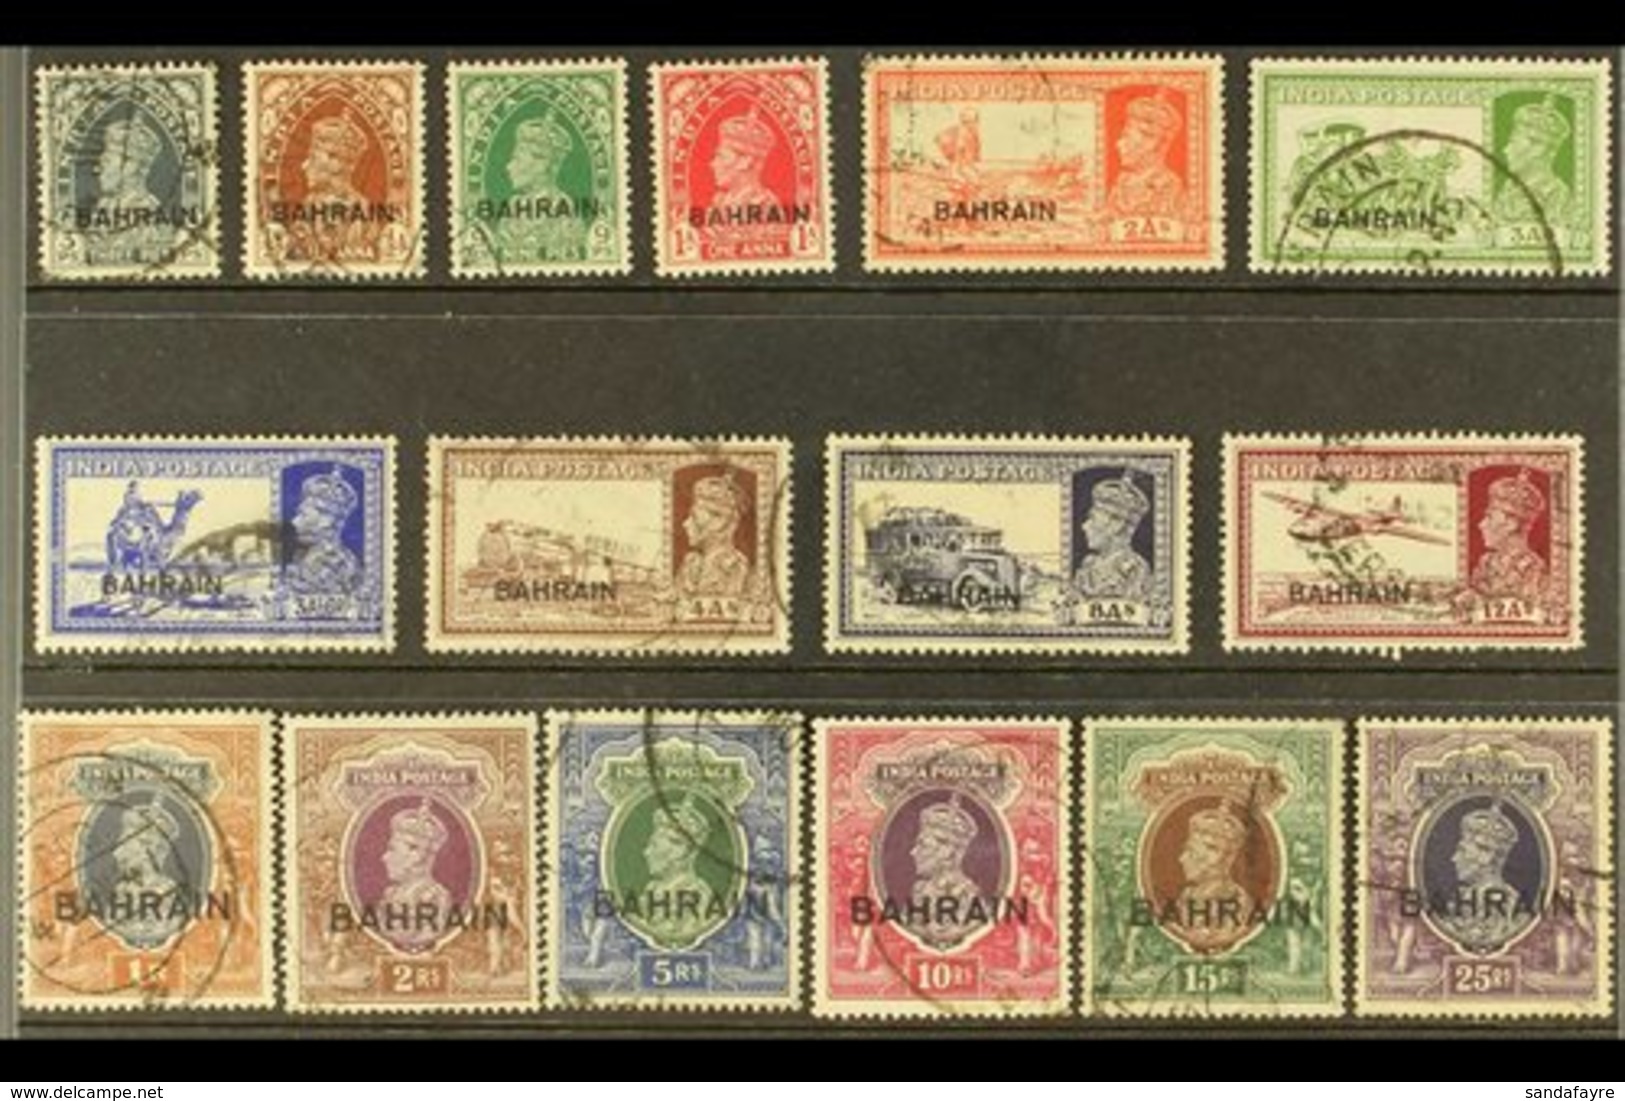 1938-41  Portrait & Pictorial Definitive Complete Set, SG 20/37, Good To Fine Cds Used. (16 Stamps) For More Images, Ple - Bahrain (...-1965)